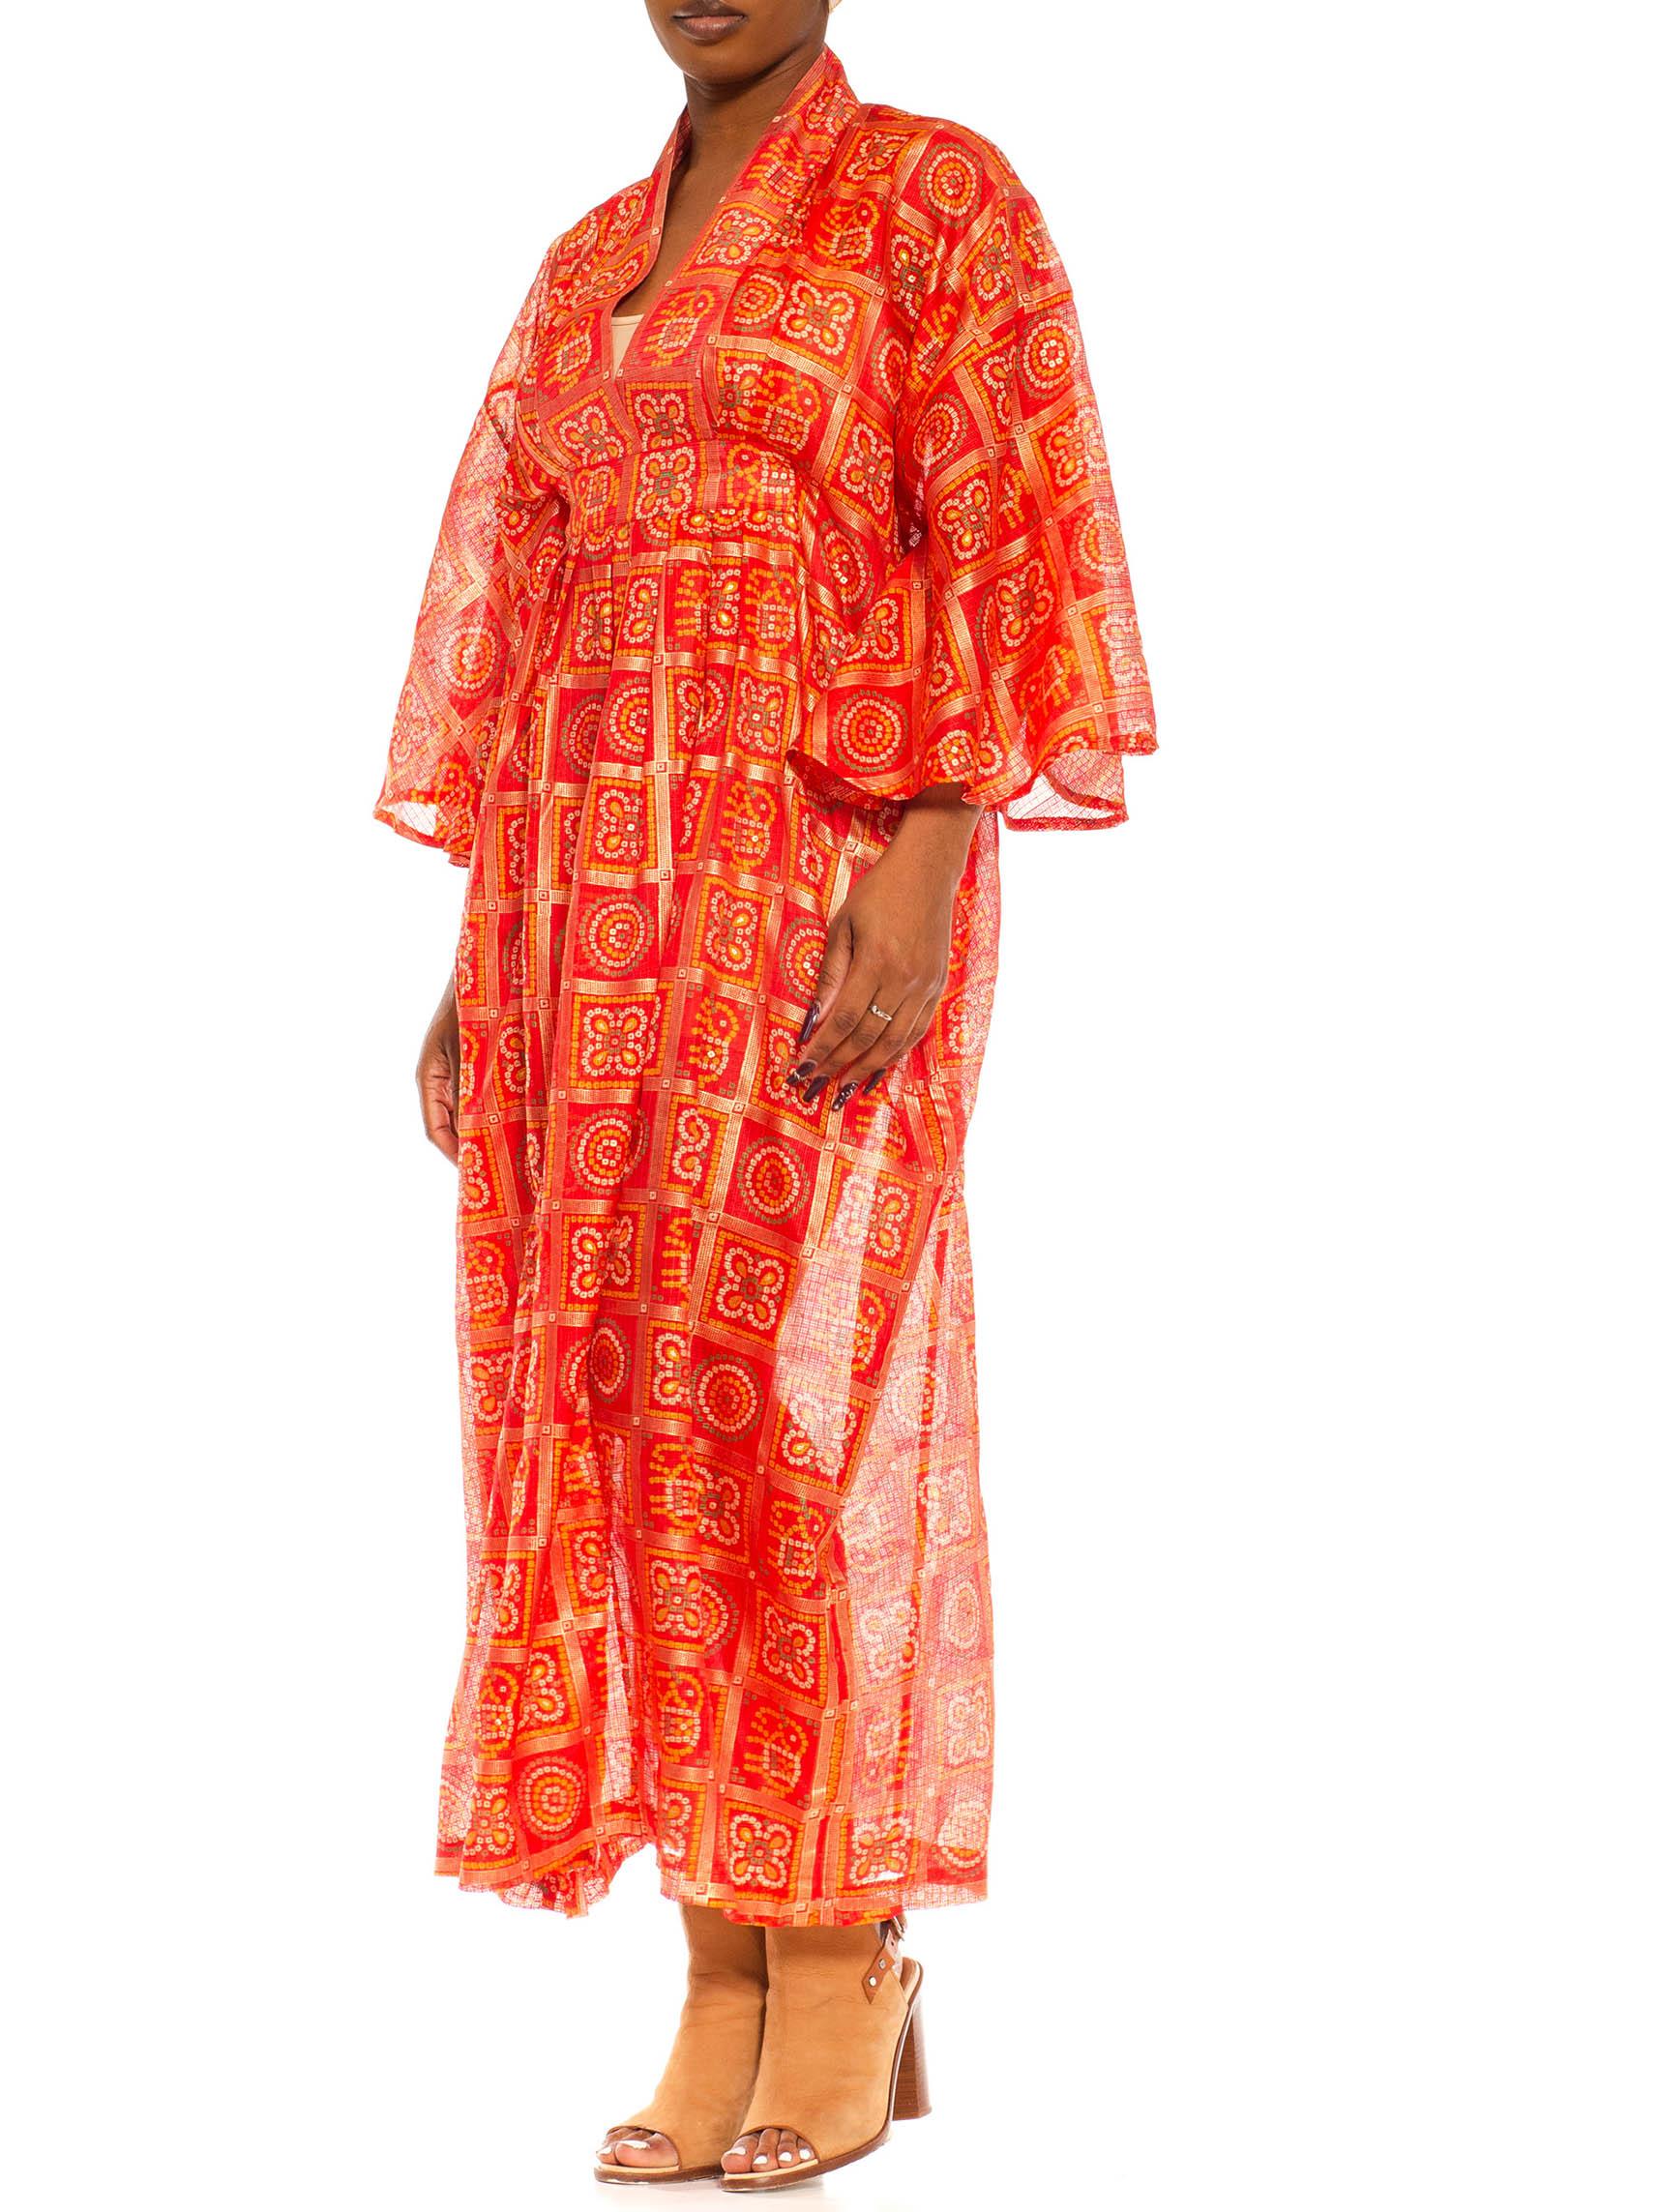 Morphew Collection Red & Gold Polyester Geometric Kaftan Made From Vintage Saris For Sale 4